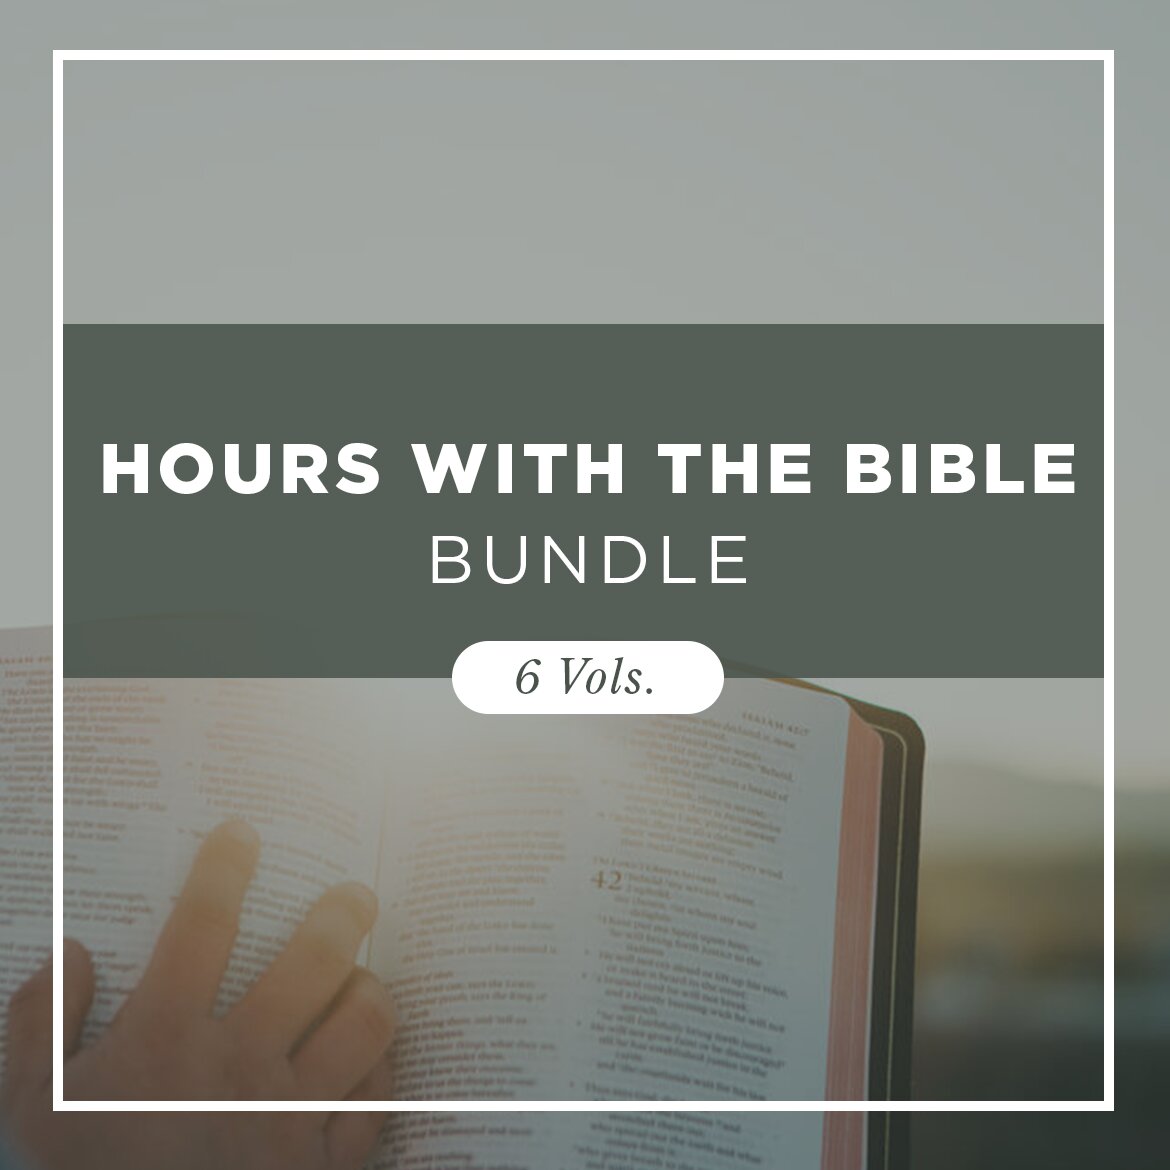 Hours with the Bible Bundle (6 vols.)